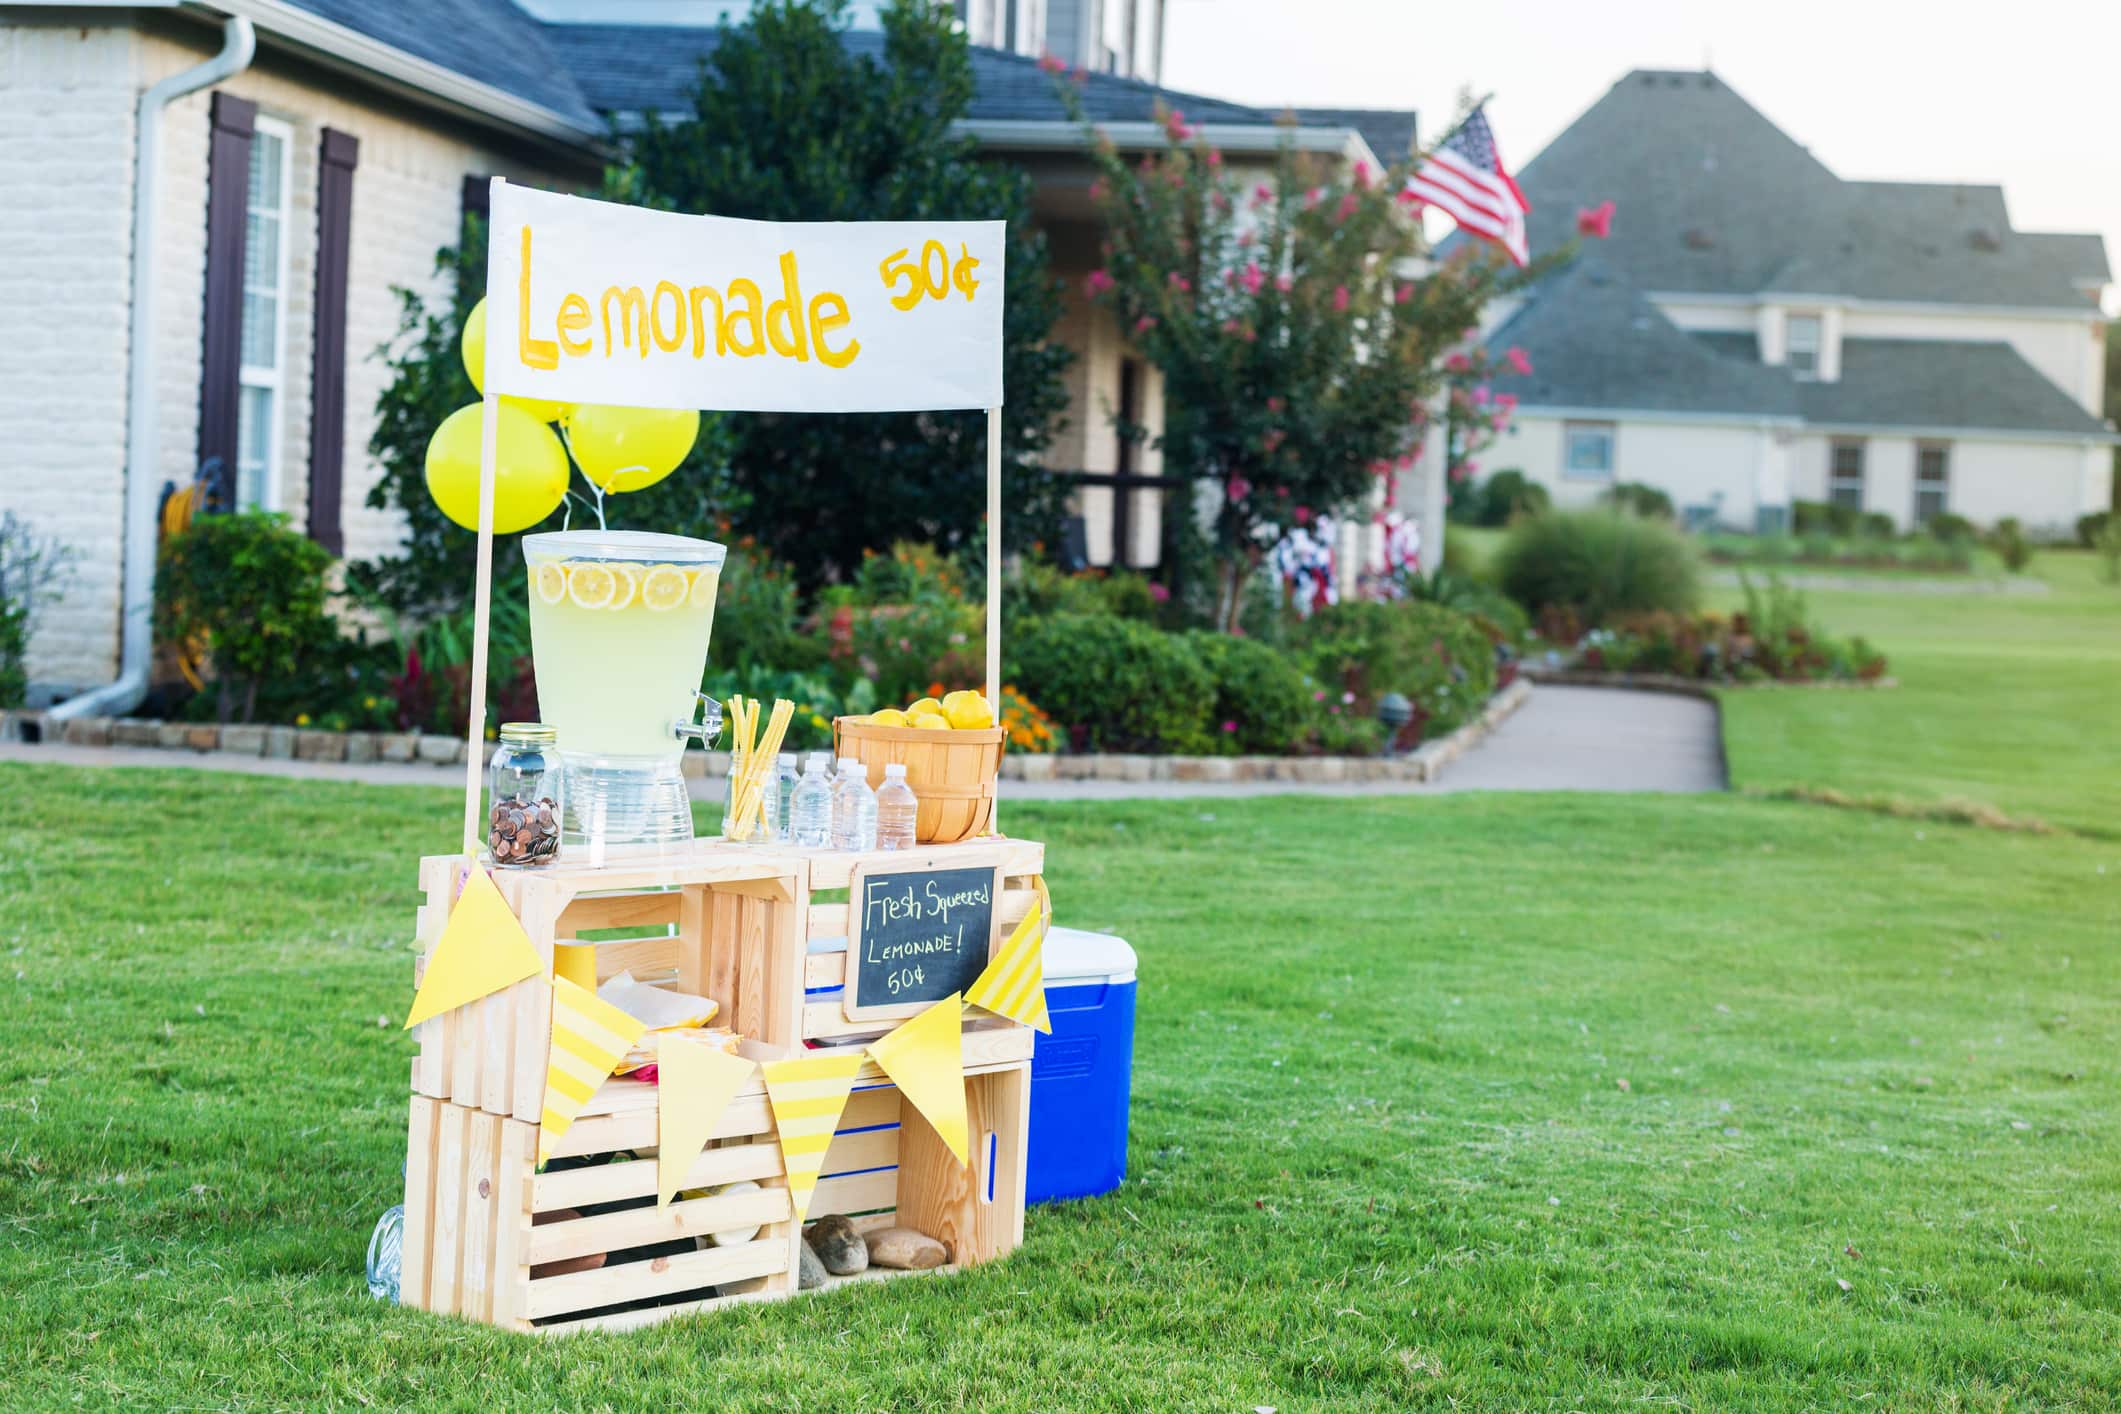 A refreshing lemonade stand is set up in the front yard of a home in the suburbs on a sunny summer day. A beverage dispenser, basket of fresh lemons and glasses are on the stand. Balloons are attached to the stand. A banner across the top of the stand lists the price of the lemonade.